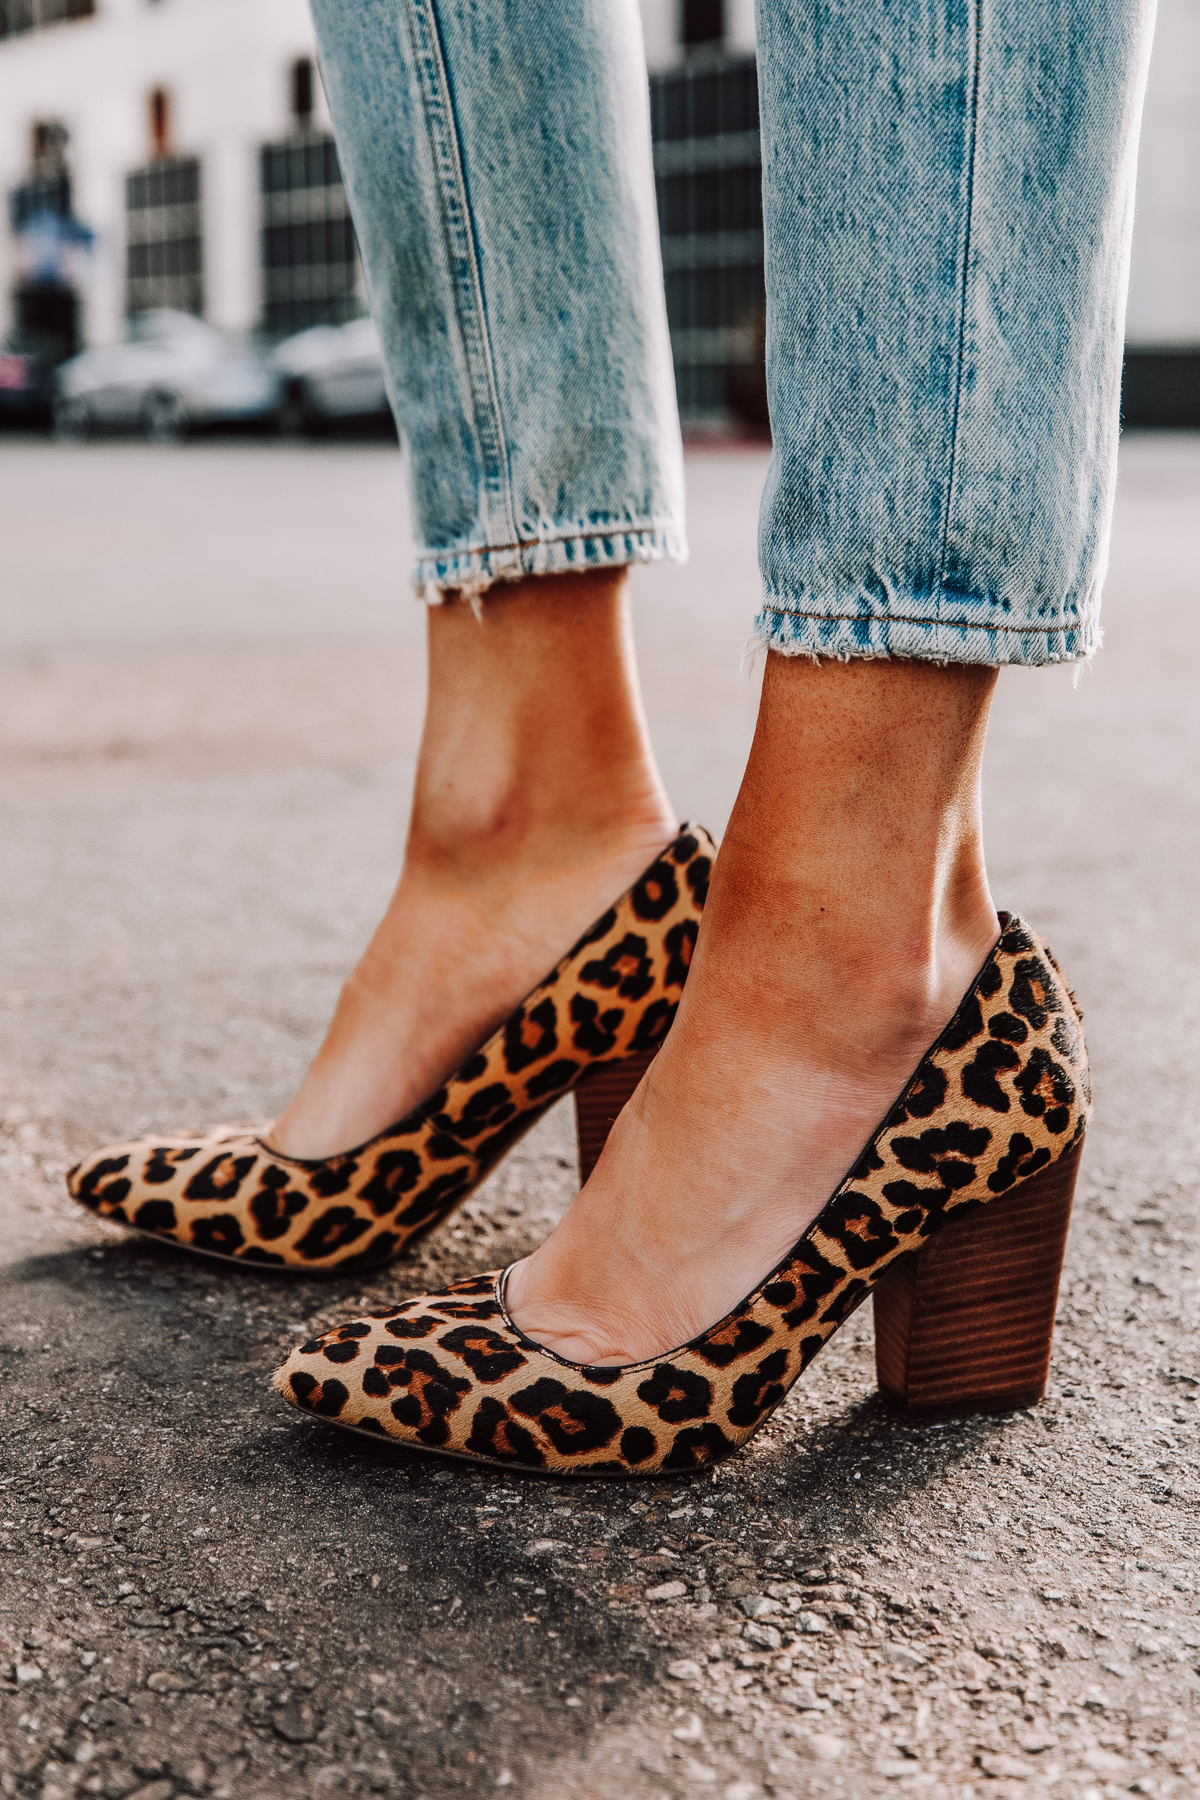 Style Leopard Print Shoes From DSW 